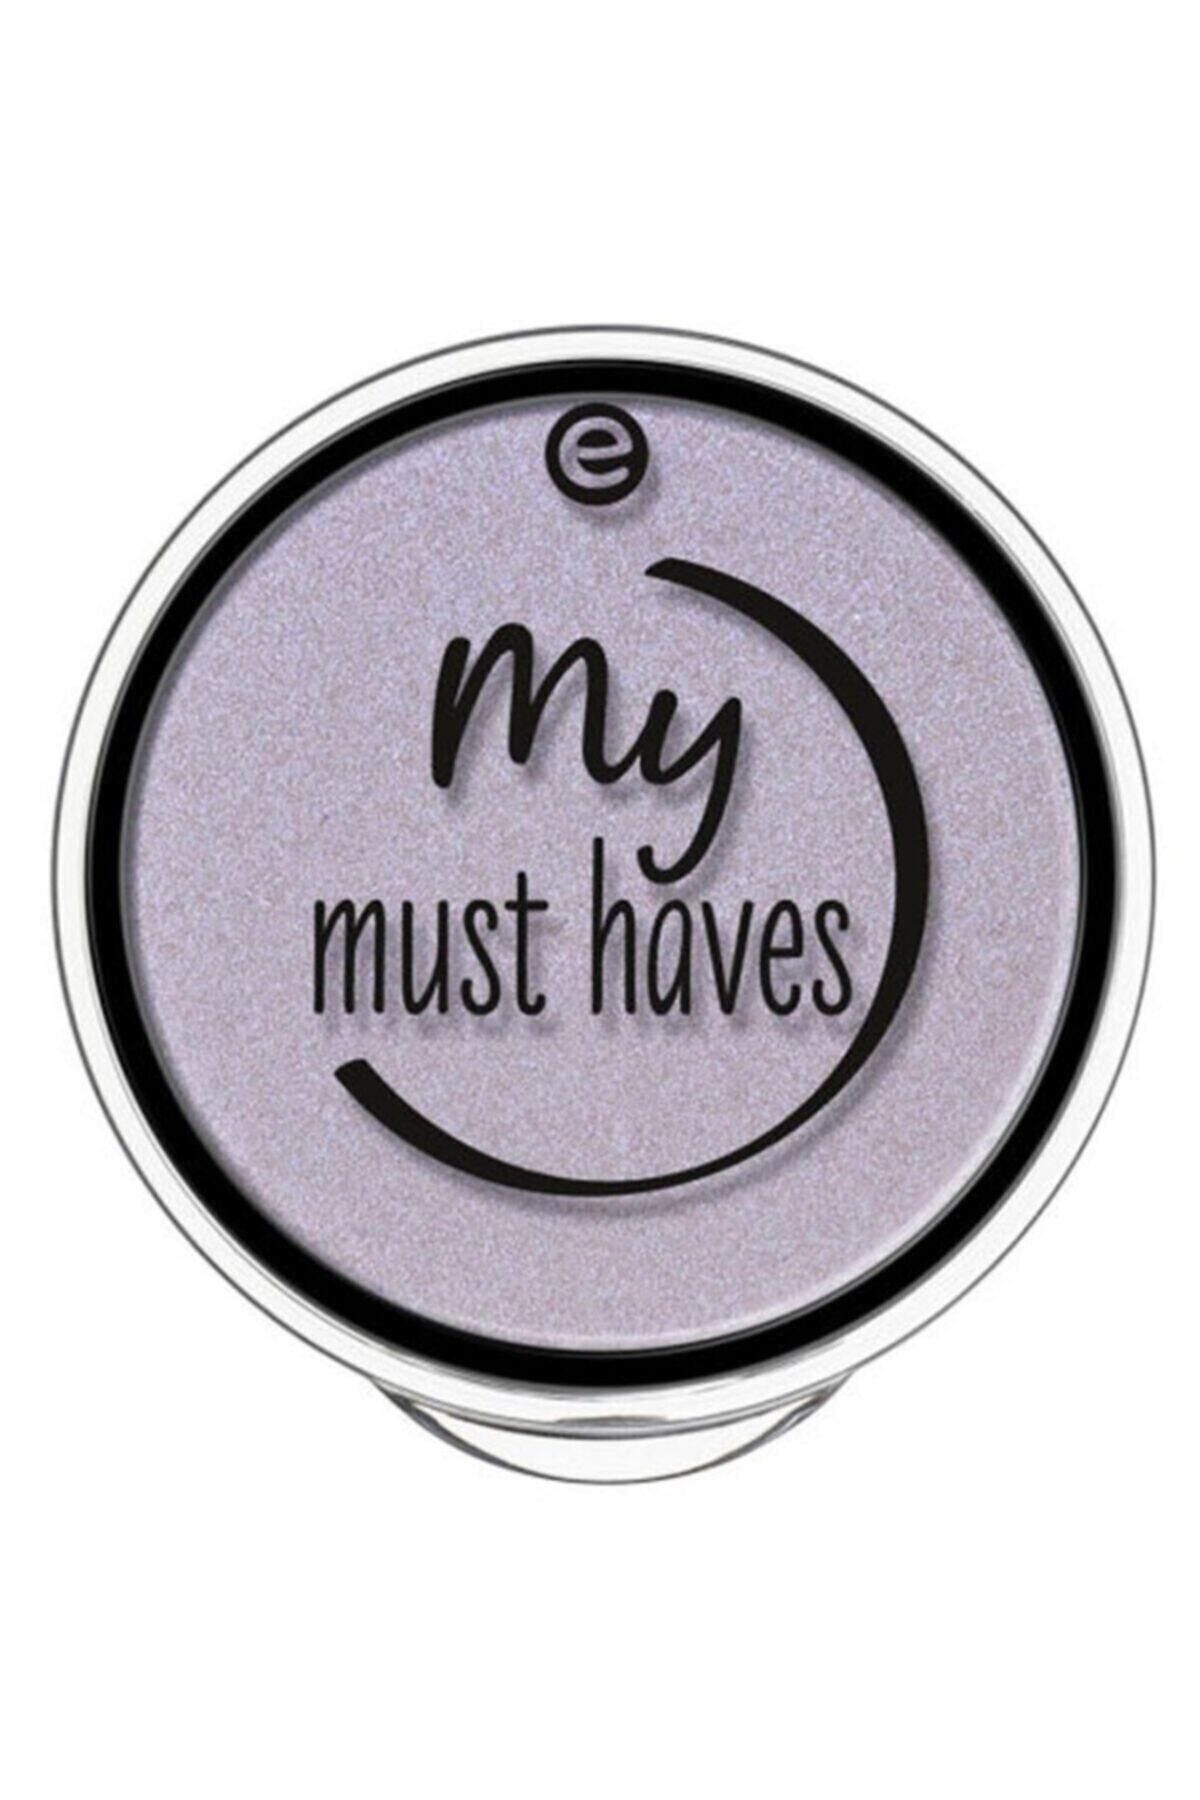 Essence Toz Pudra - My Must Haves Holo Powder 3 2 g